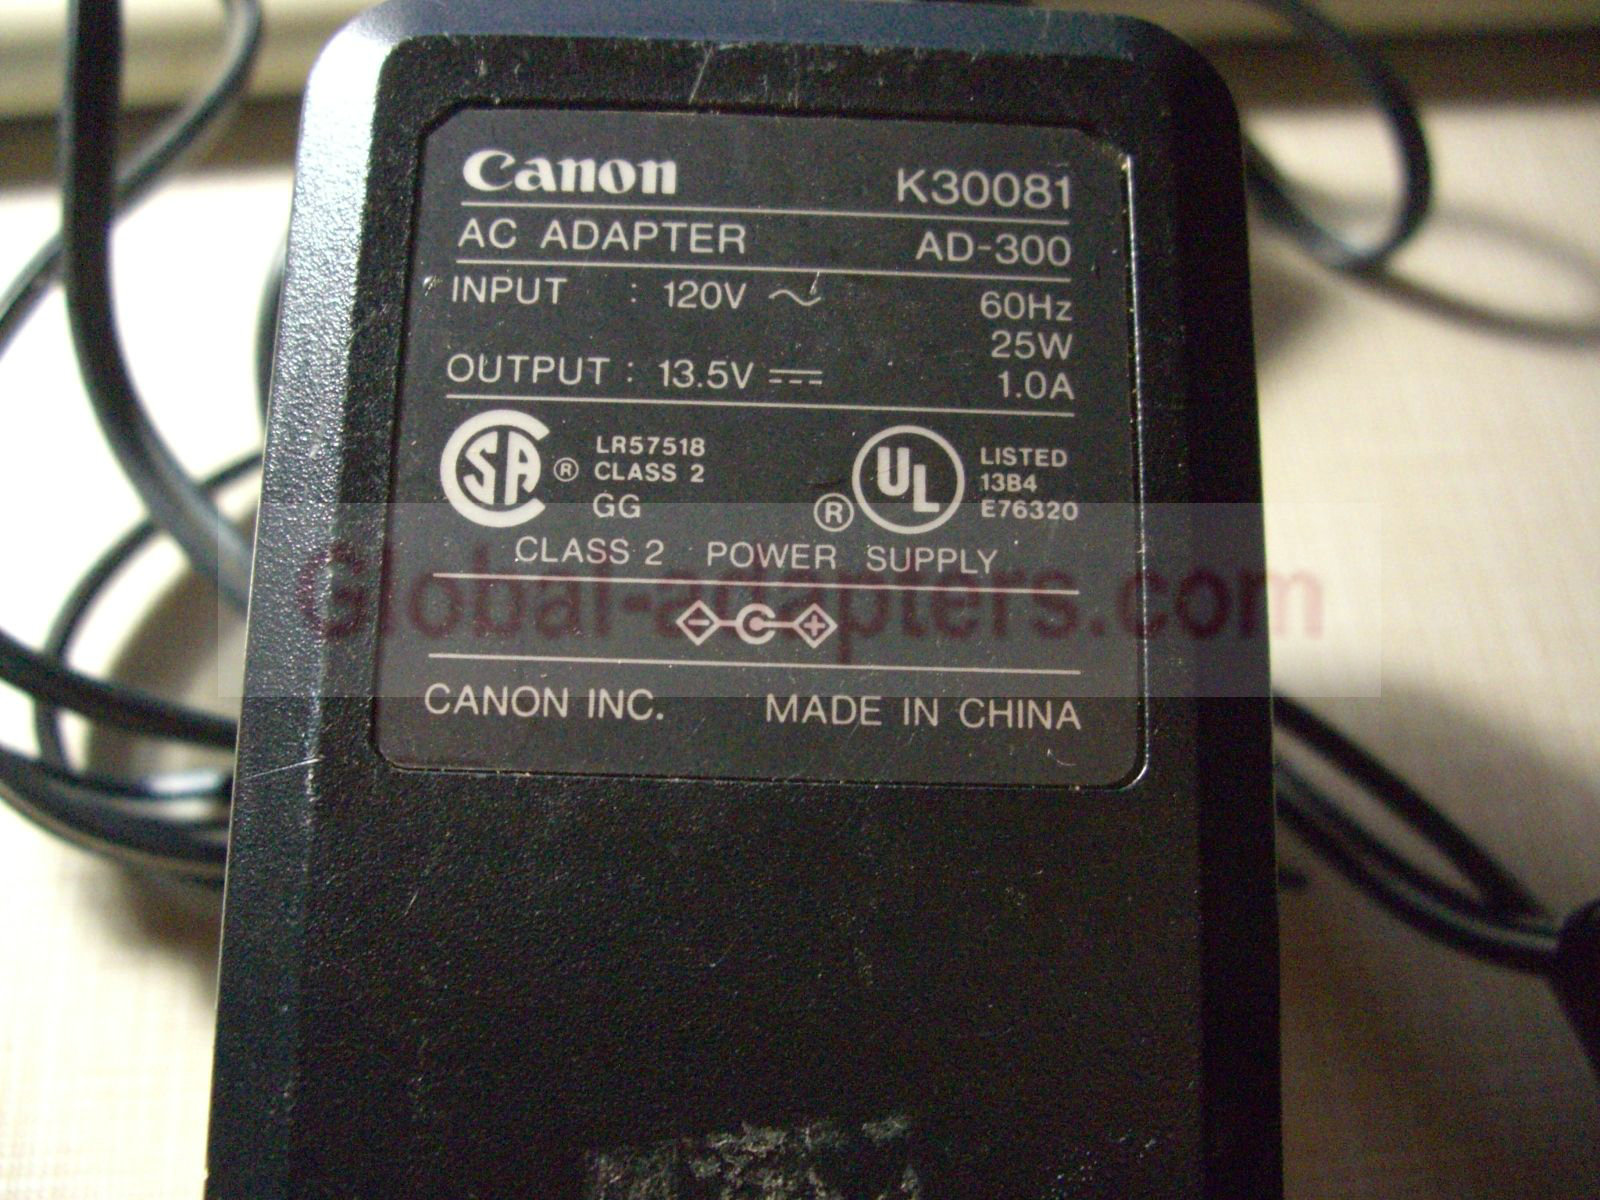 NEW 13.5V 1A CANON K30081 AD300 AC ADAPTER